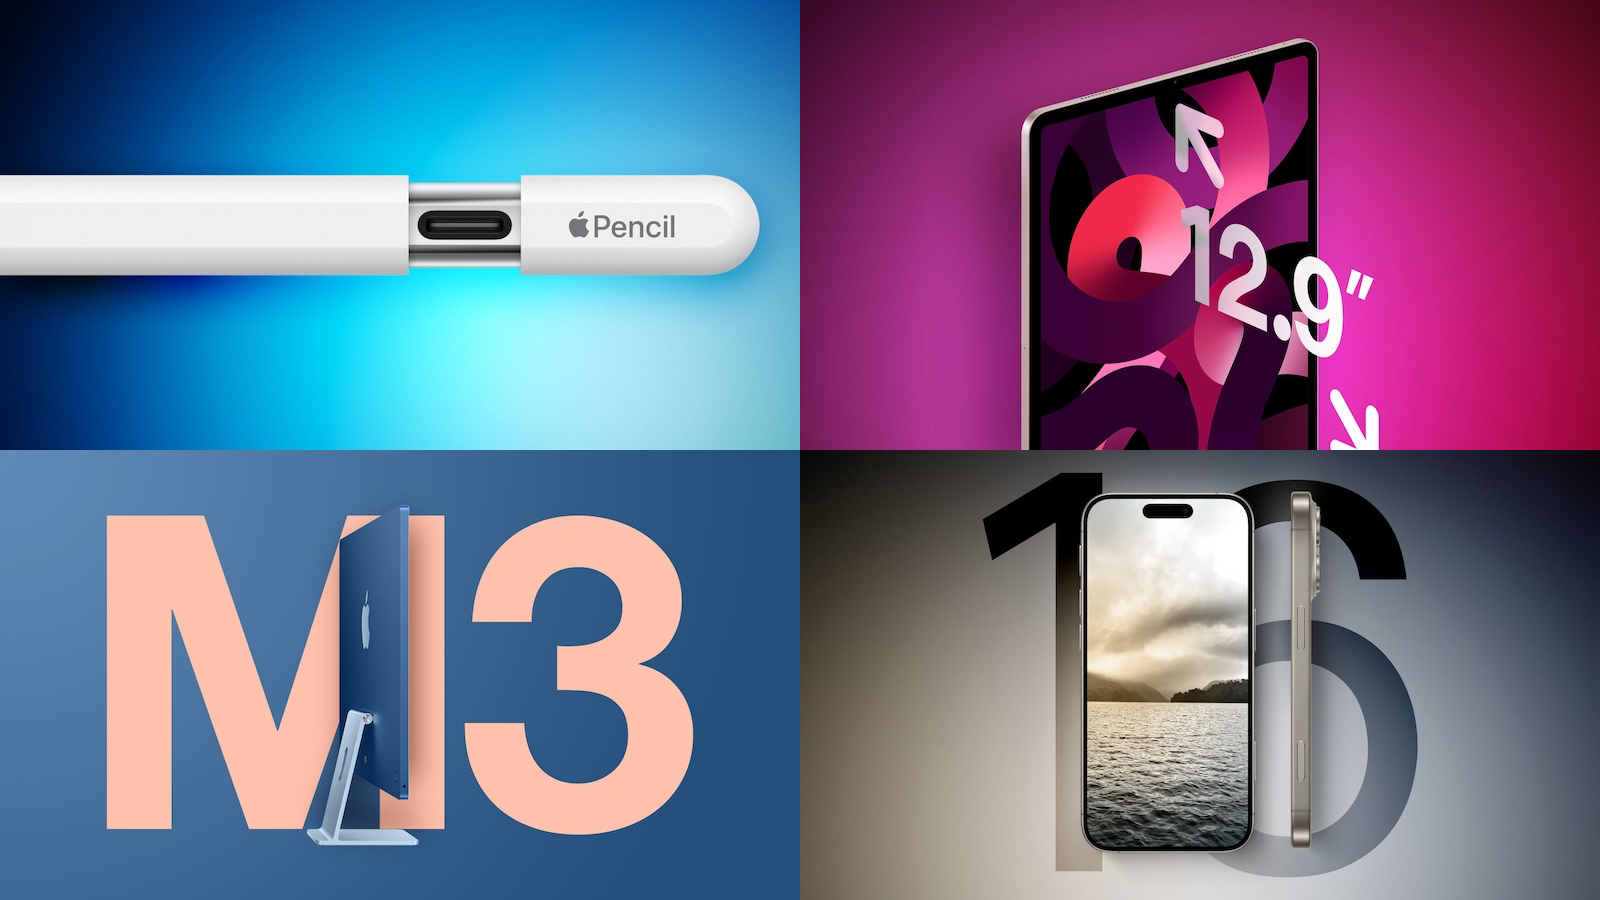 Top Stories: New USB-C Apple Pencil, iPad and iMac Rumors, and More